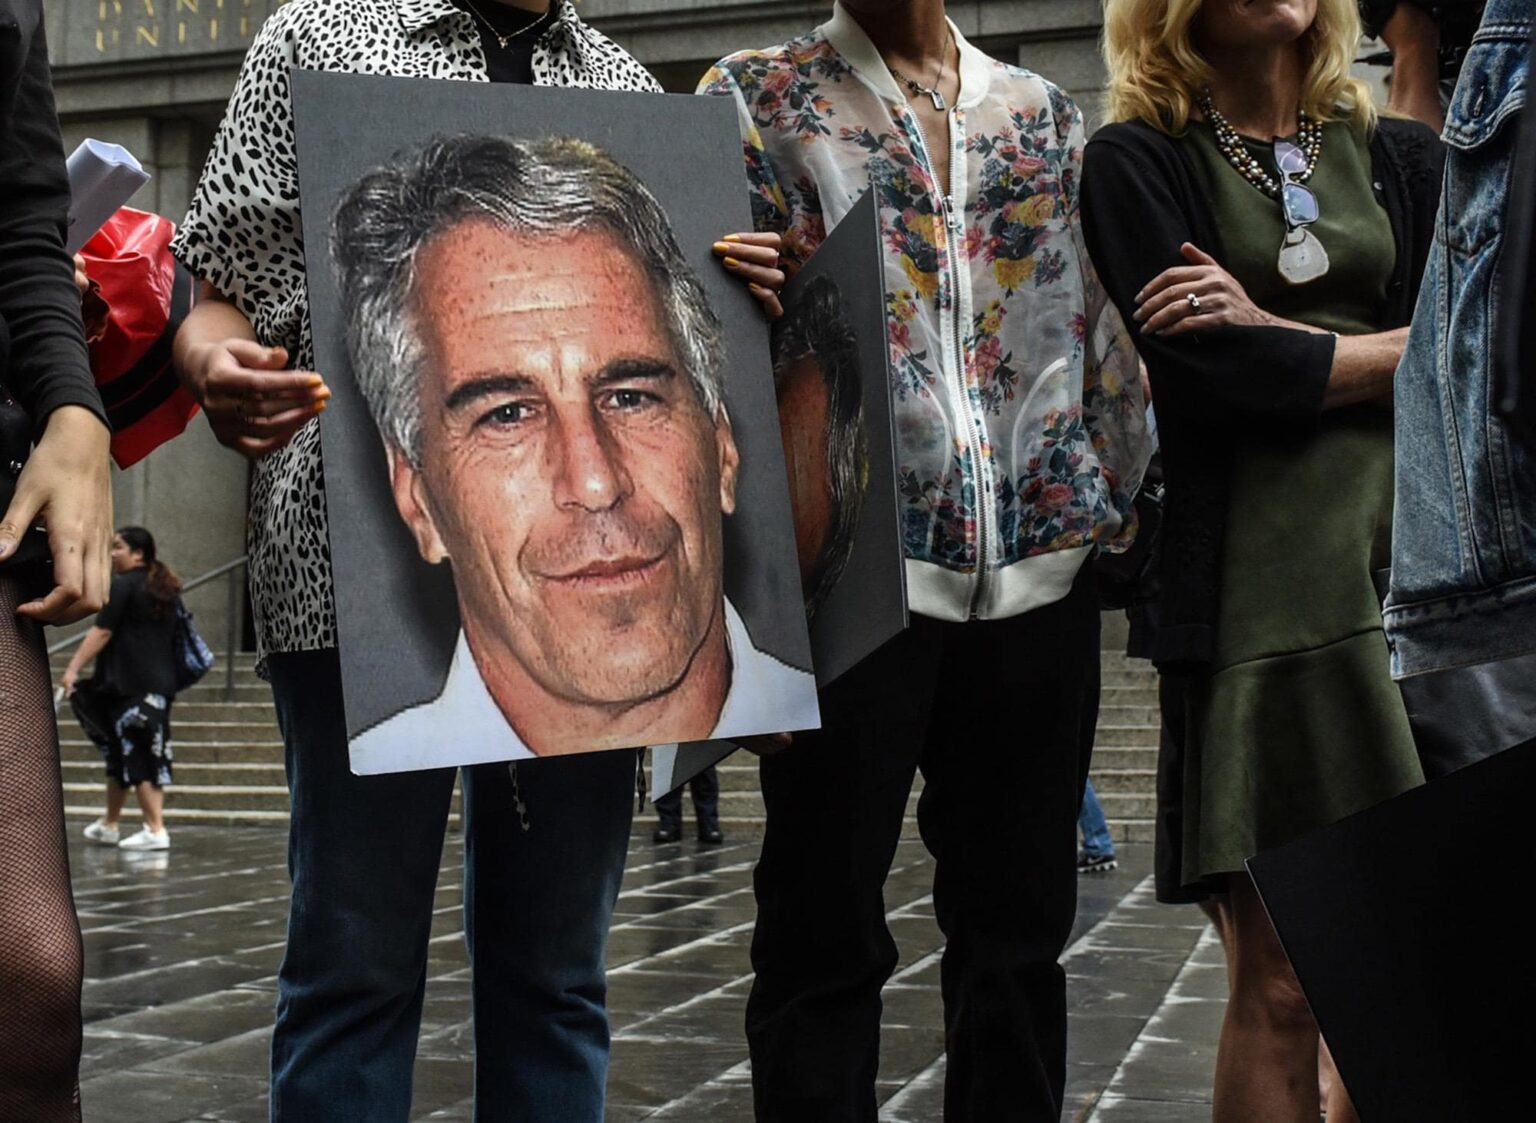 Could Jeffrey Epstein be alive? Explore the latest conspiracy from the lawyer who claims the accused sex trafficker faked his own death.